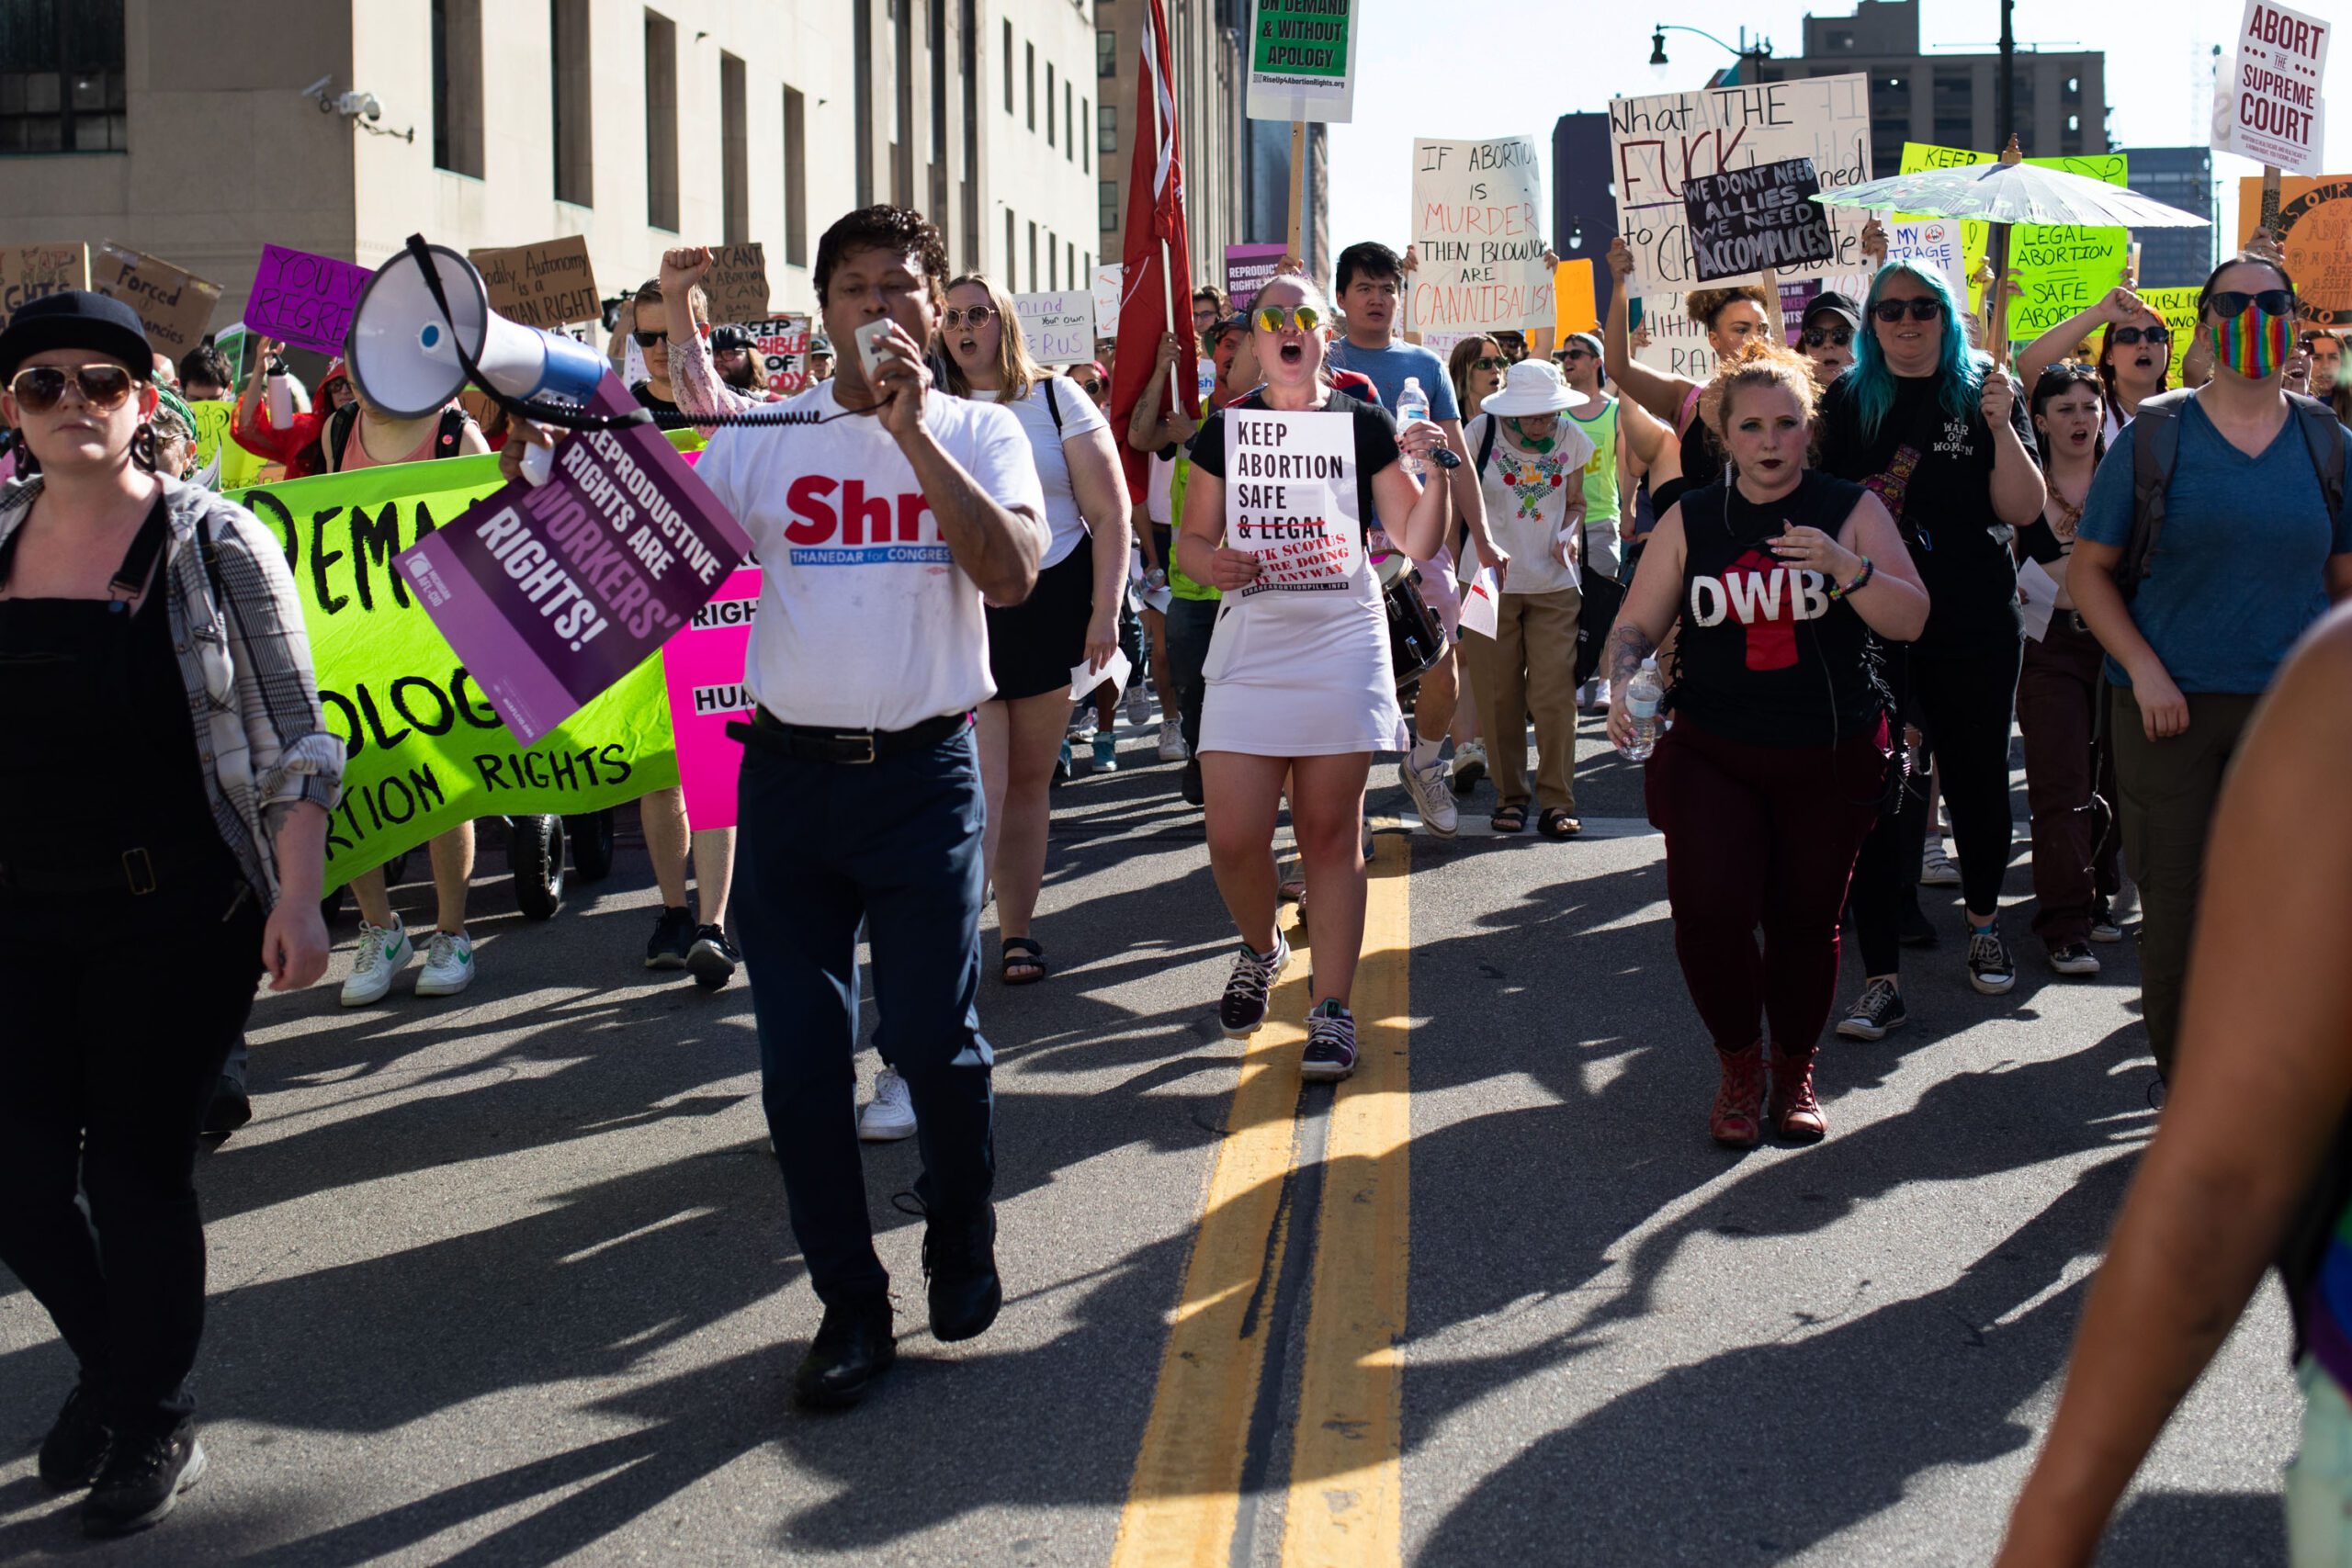 Abortion rights demonstrators march through the streets of Detroit.